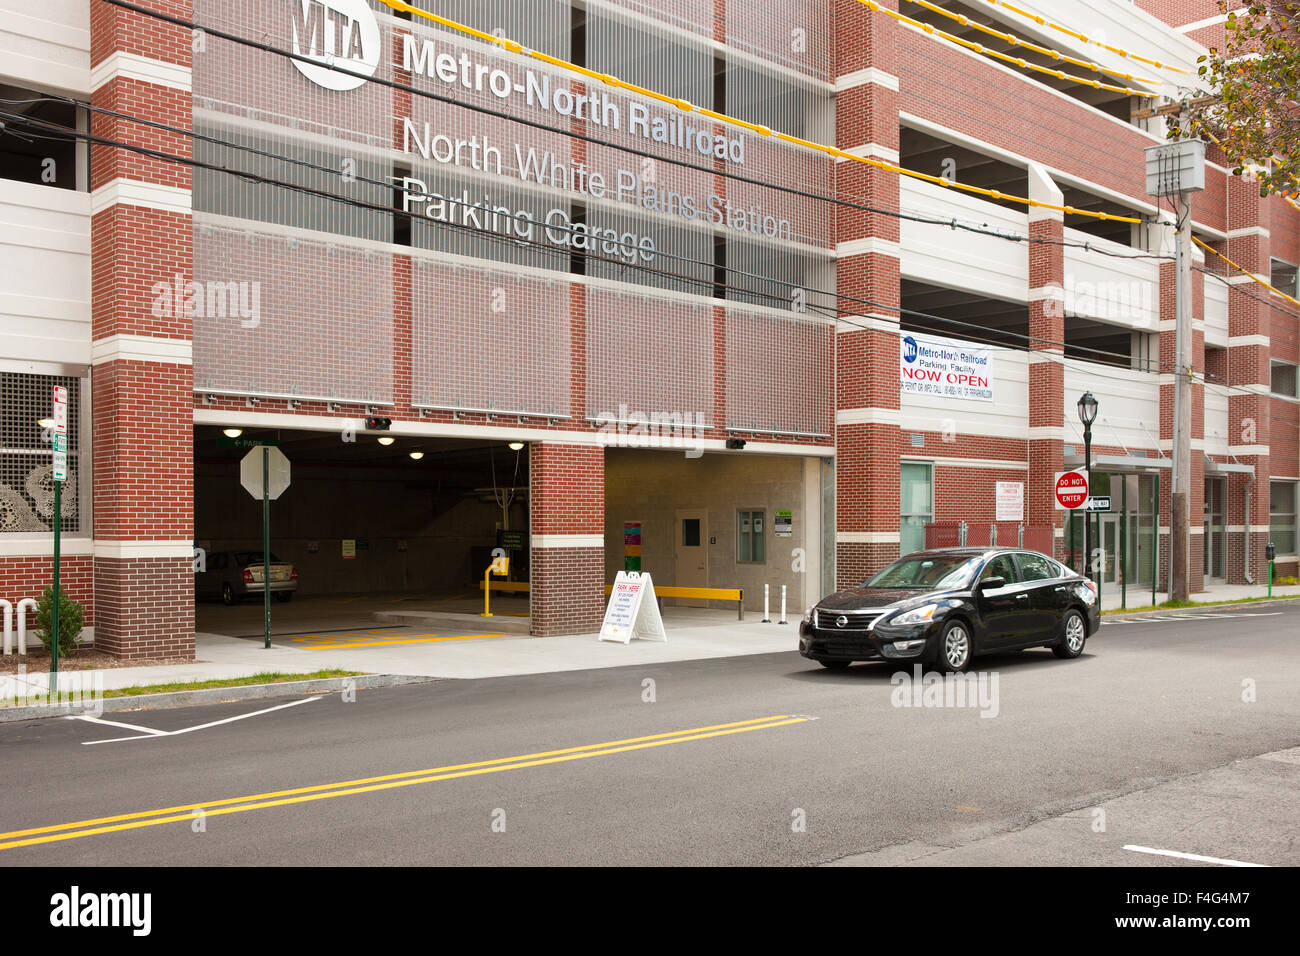 A car passes the Metro-North Railroad North White Plains Station Parking Garage in White Plains, New York. Stock Photo